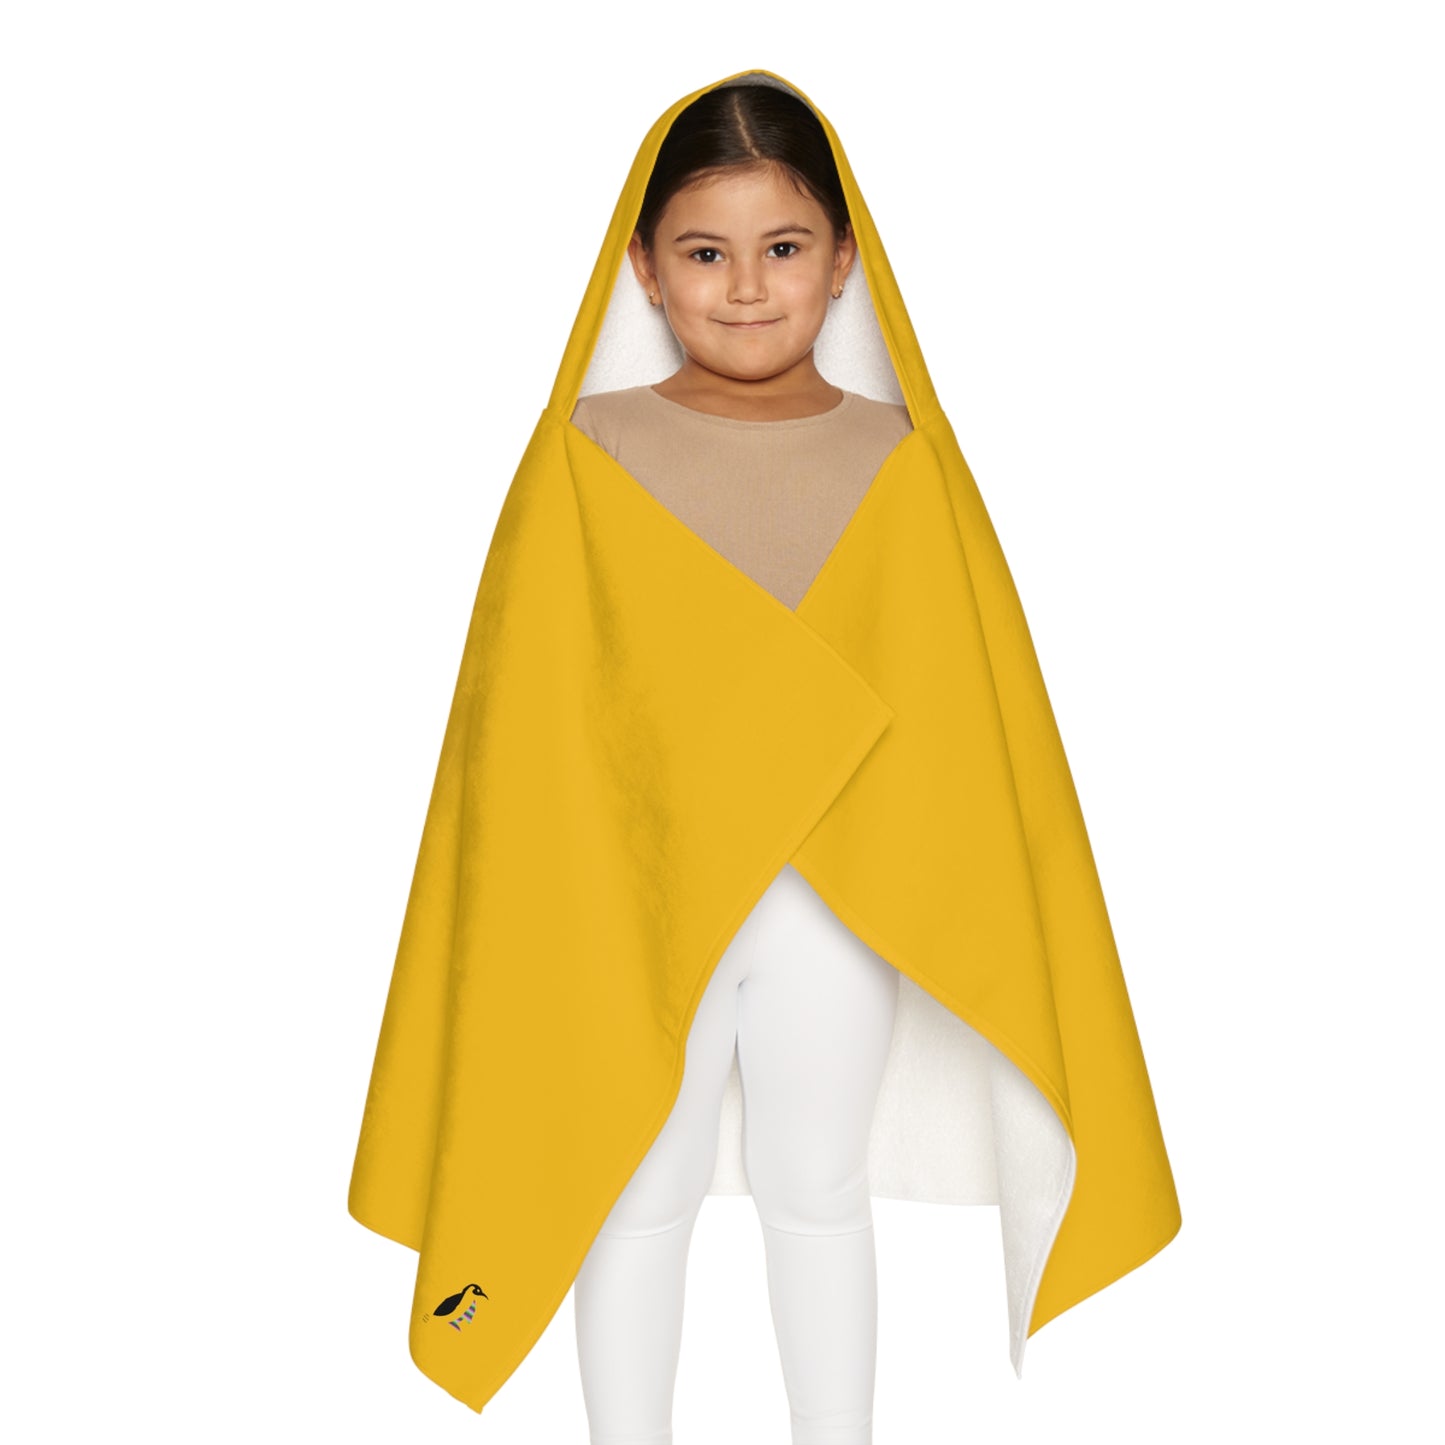 Youth Hooded Towel: Tennis Yellow